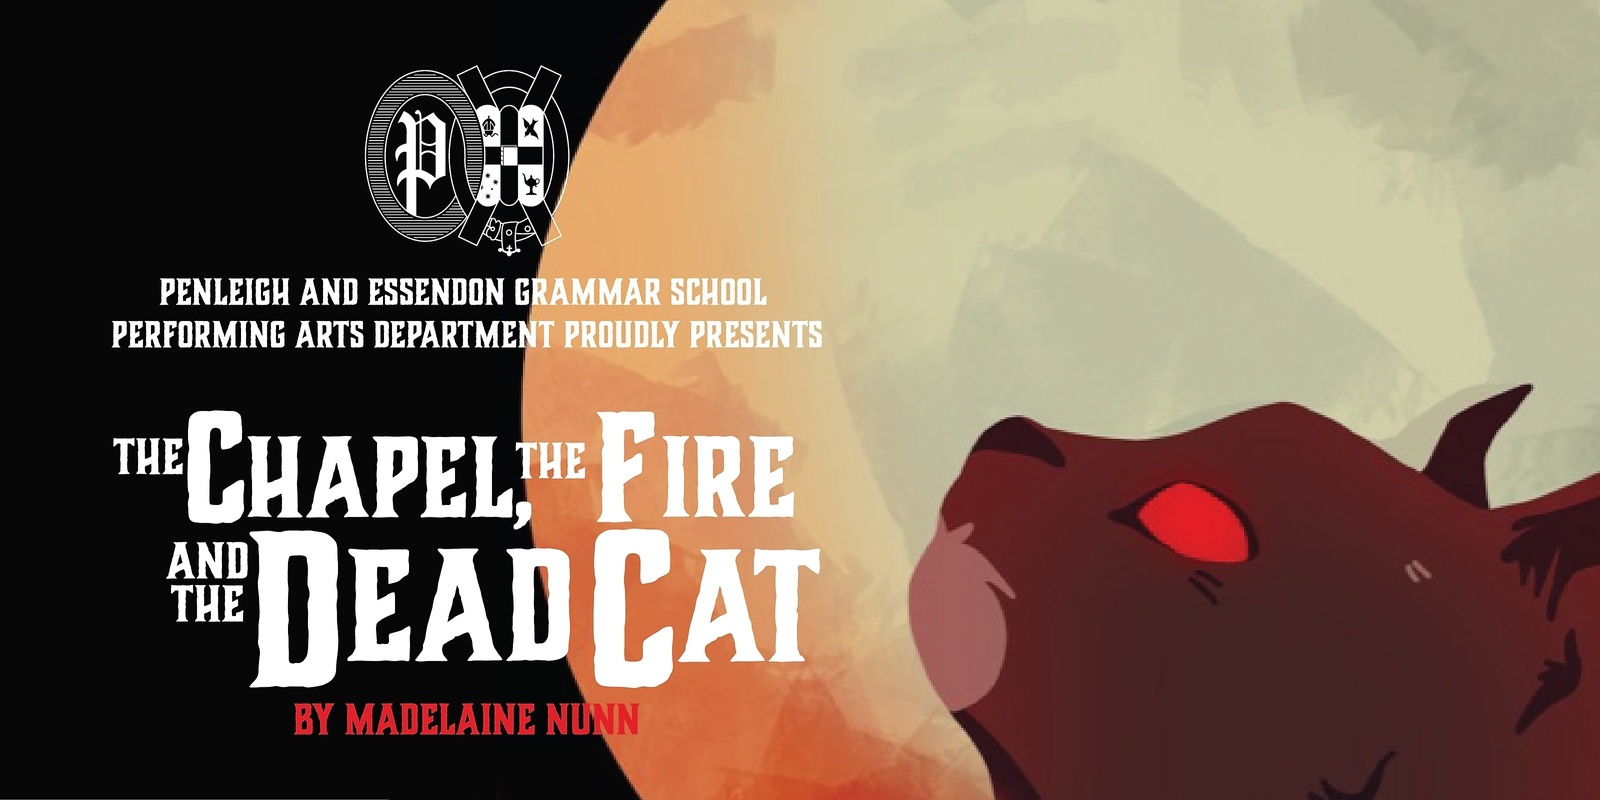 The Chapel, the Fire and the Dead Cat